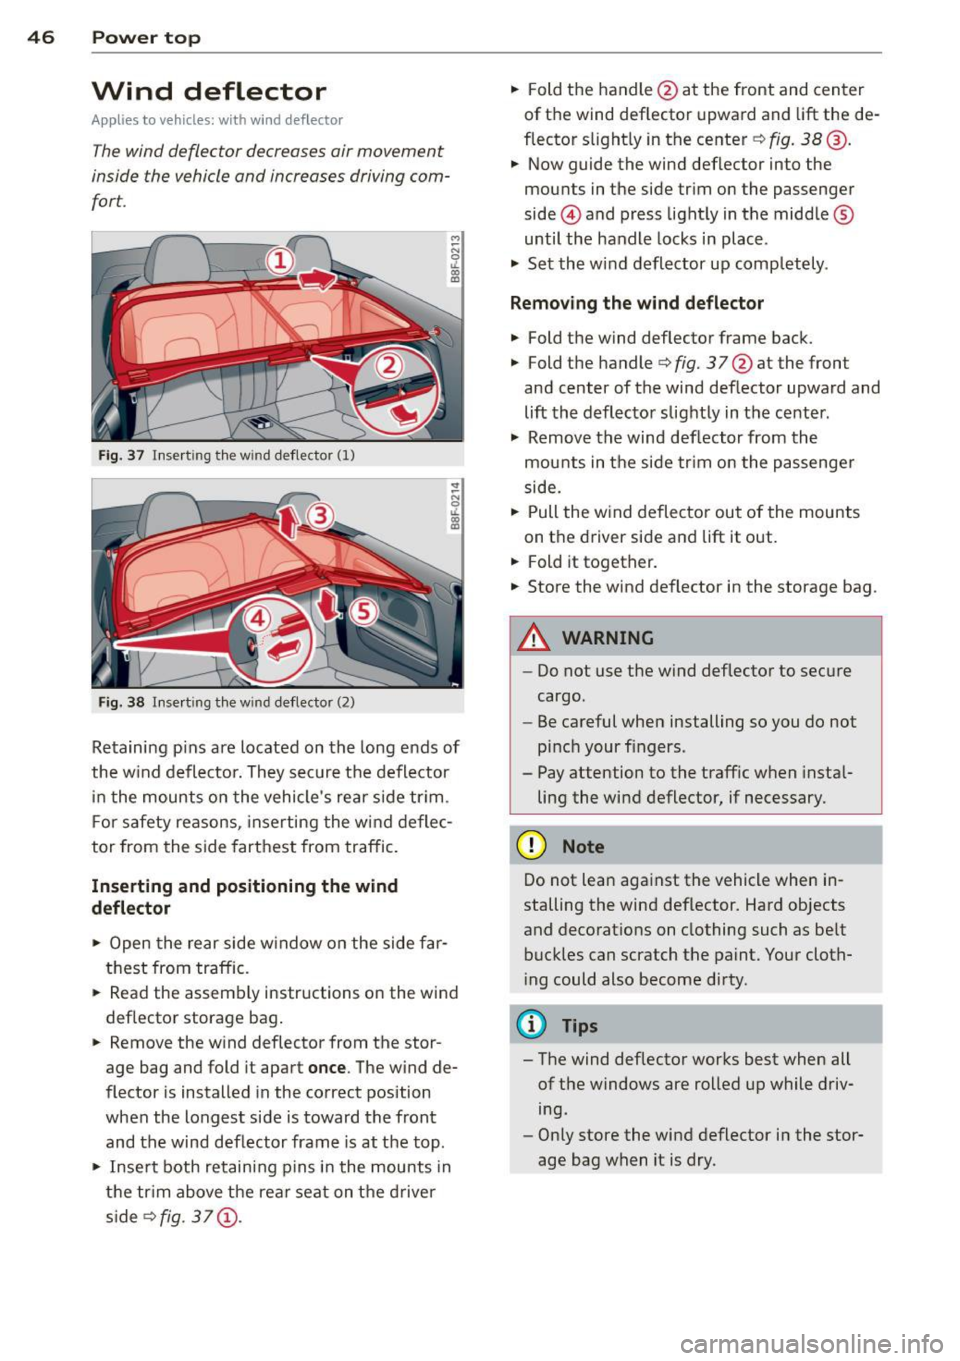 AUDI A5 CABRIOLET 2013 Service Manual 46  Power  top 
Wind  deflector 
Applies to vehicles:  with wind  deflector 
The wind deflector  decreases  air movement 
inside  the  vehicle  and  increases  driving com­
fort. 
Fi g. 37 Insert ing